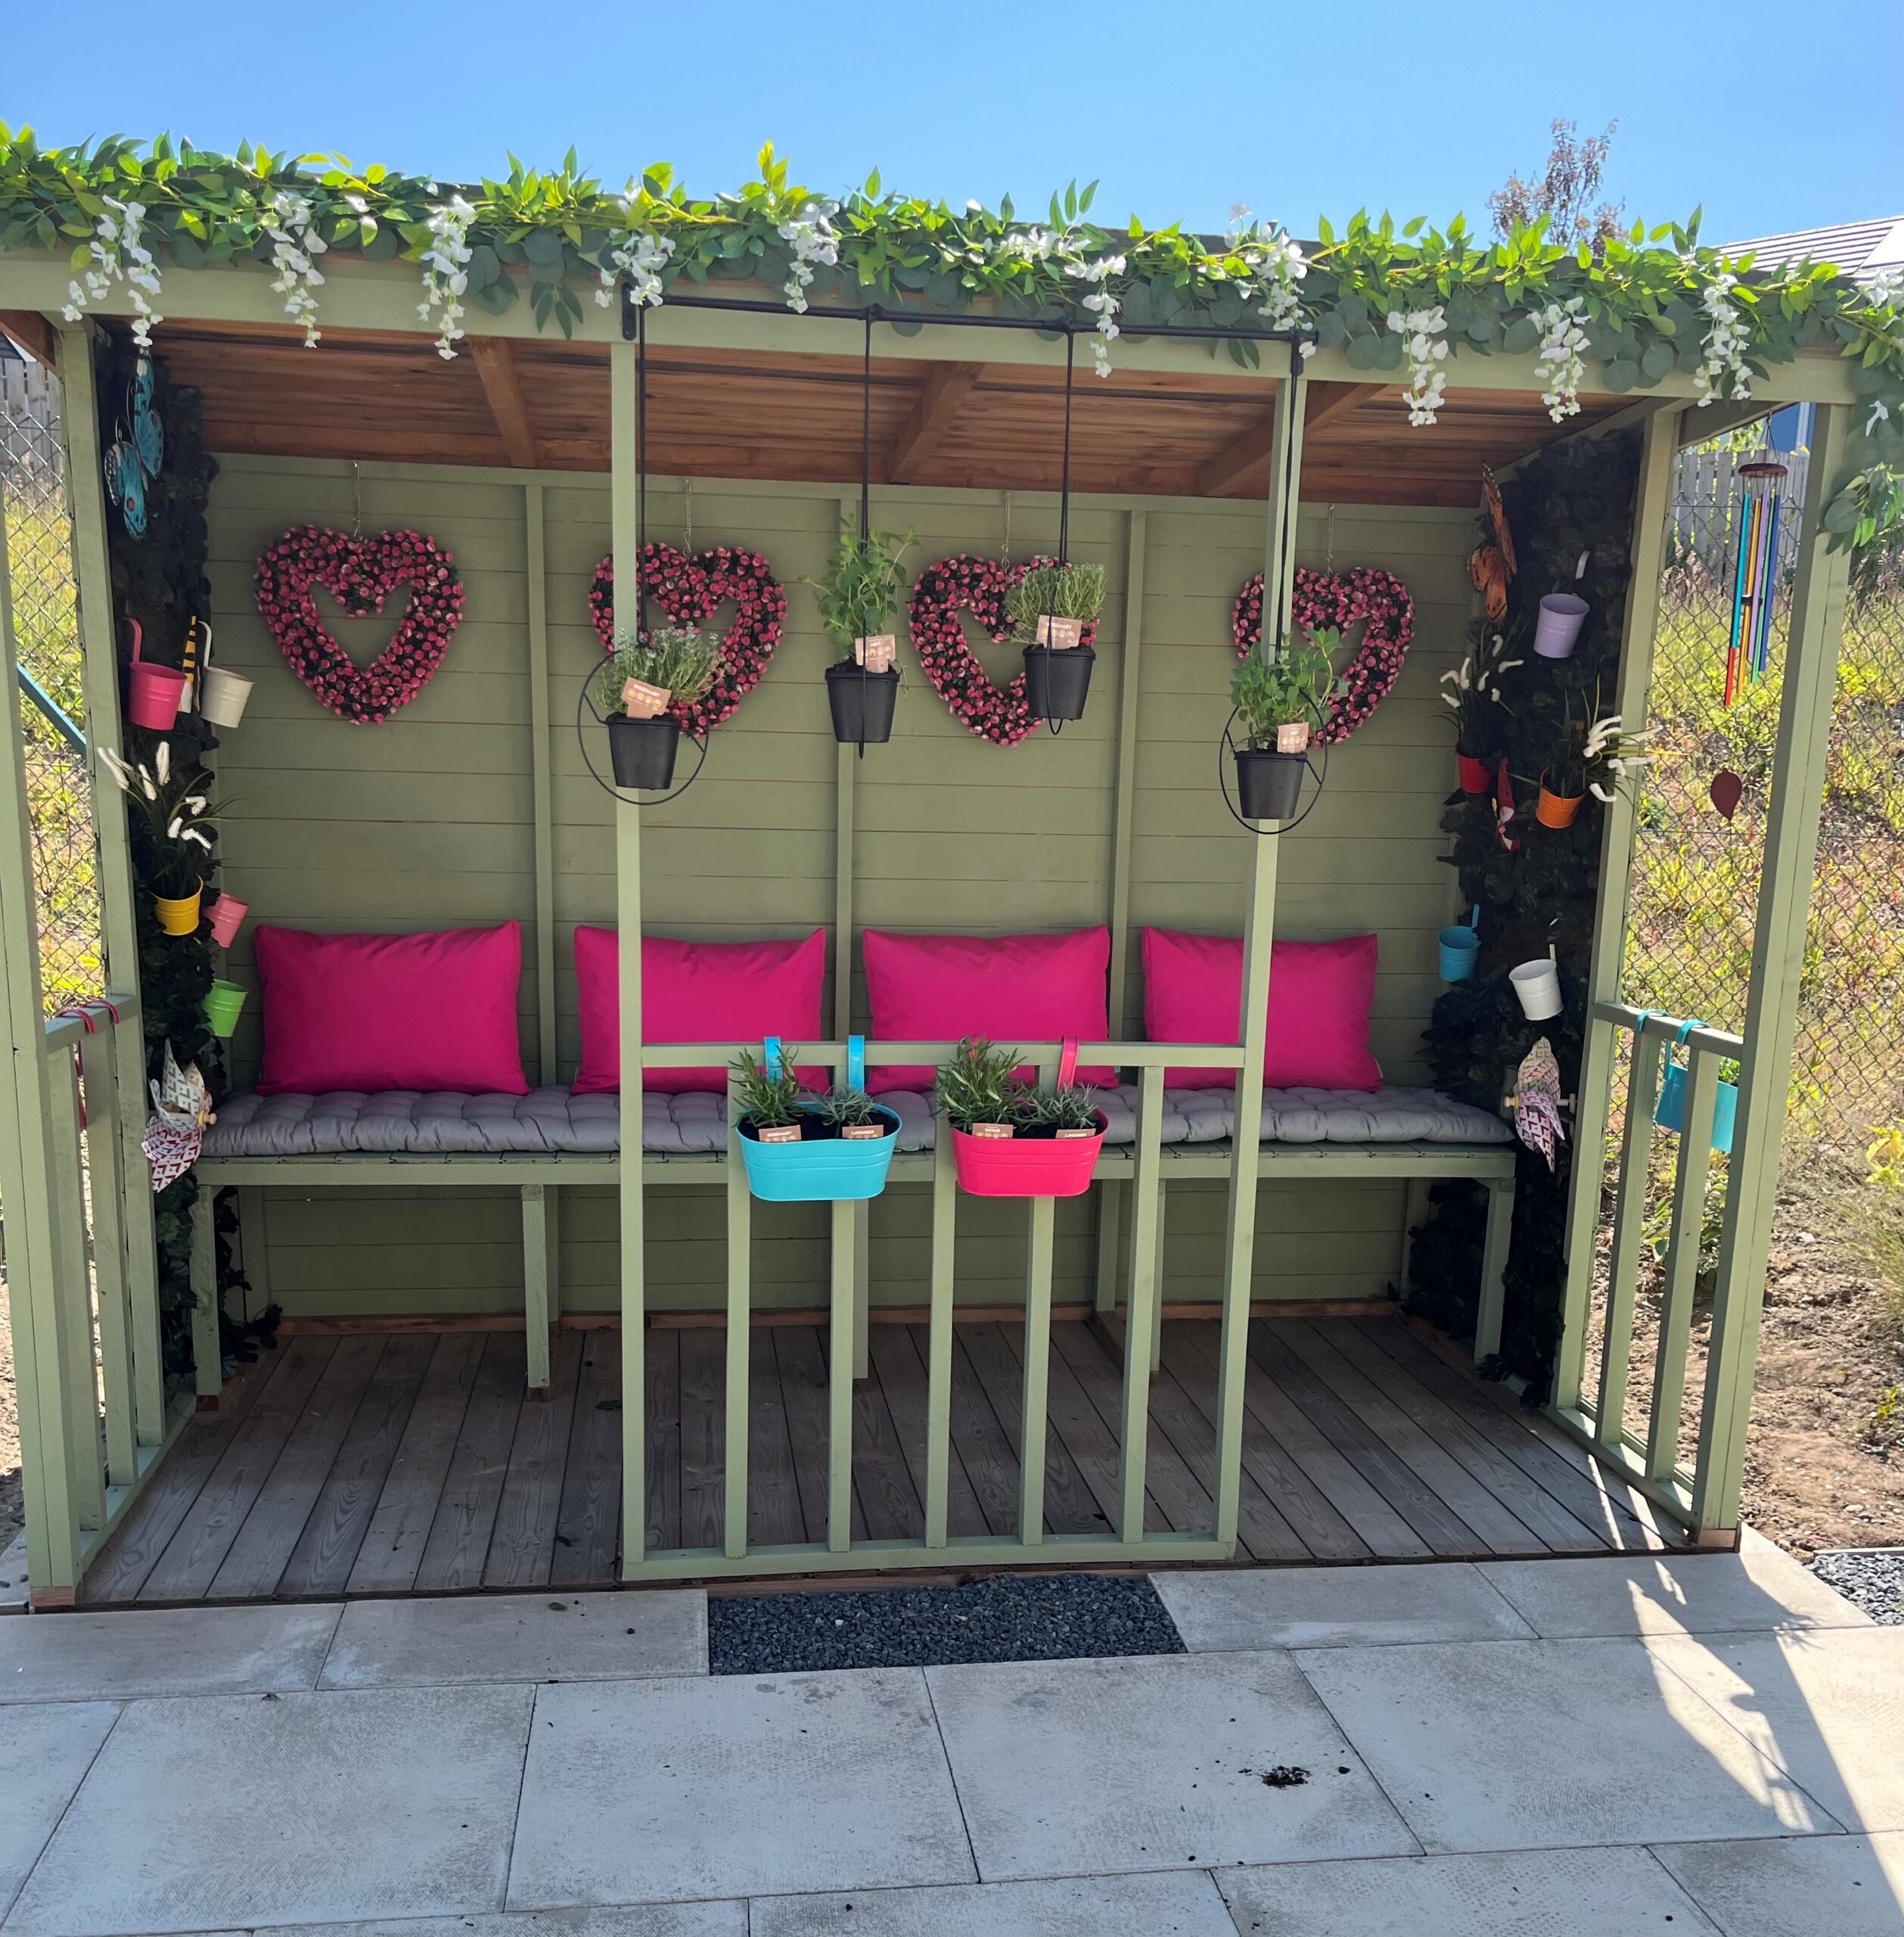 Shed Transformed into Sensory Space in The Garden